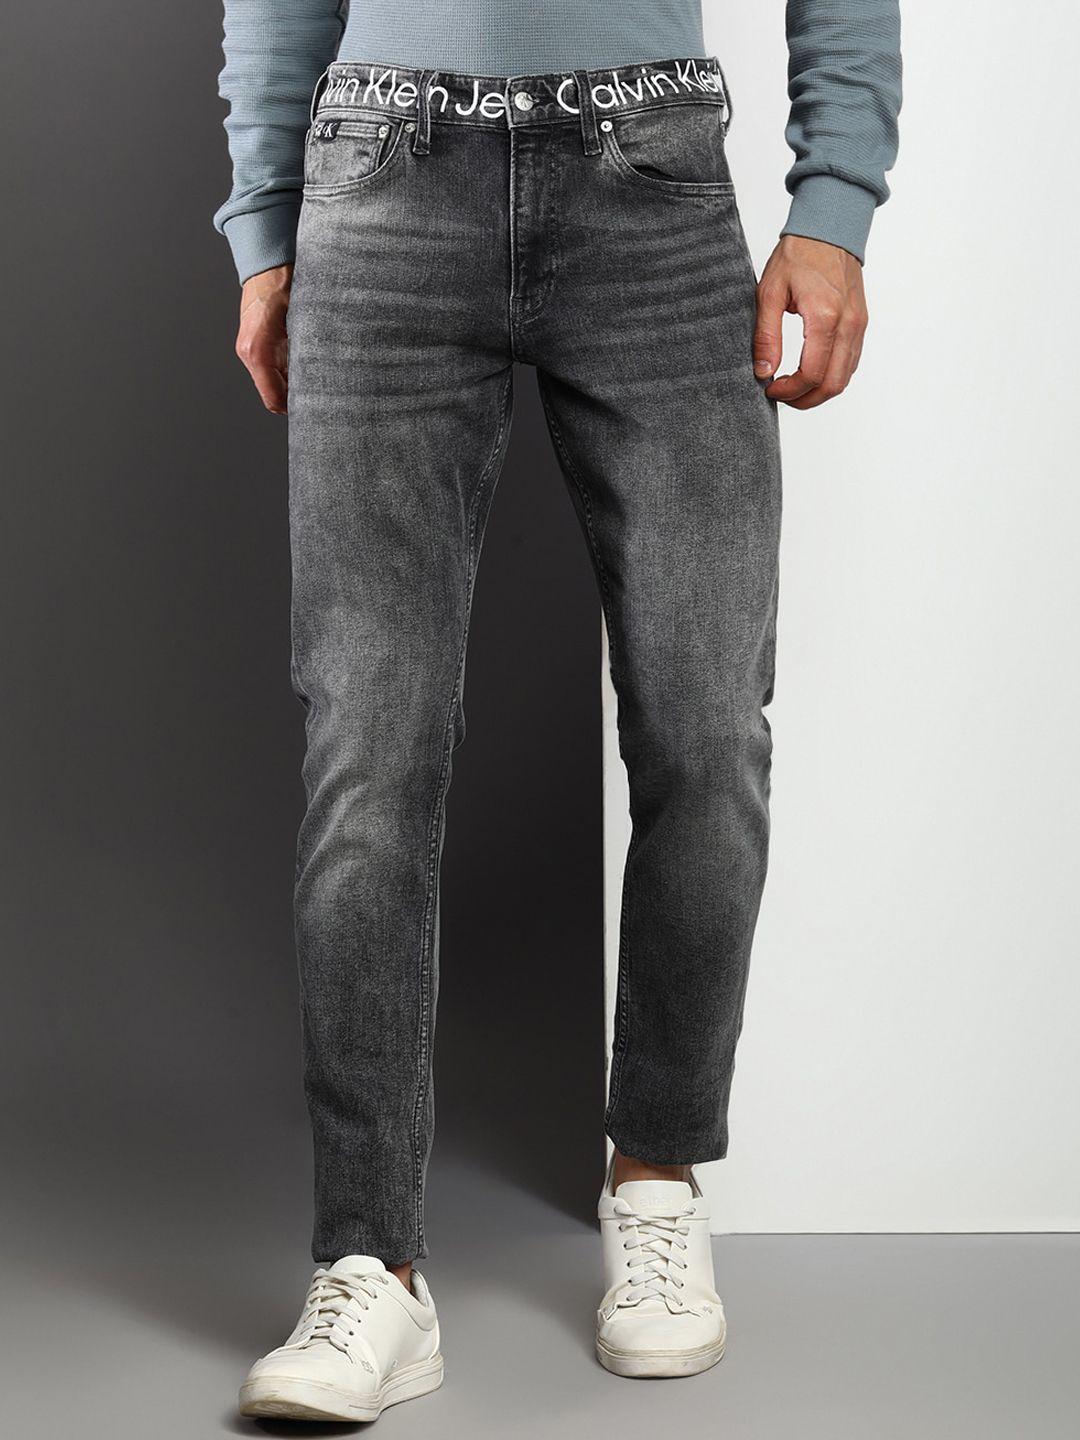 calvin klein jeans men tapered fit heavy fade cotton jeans